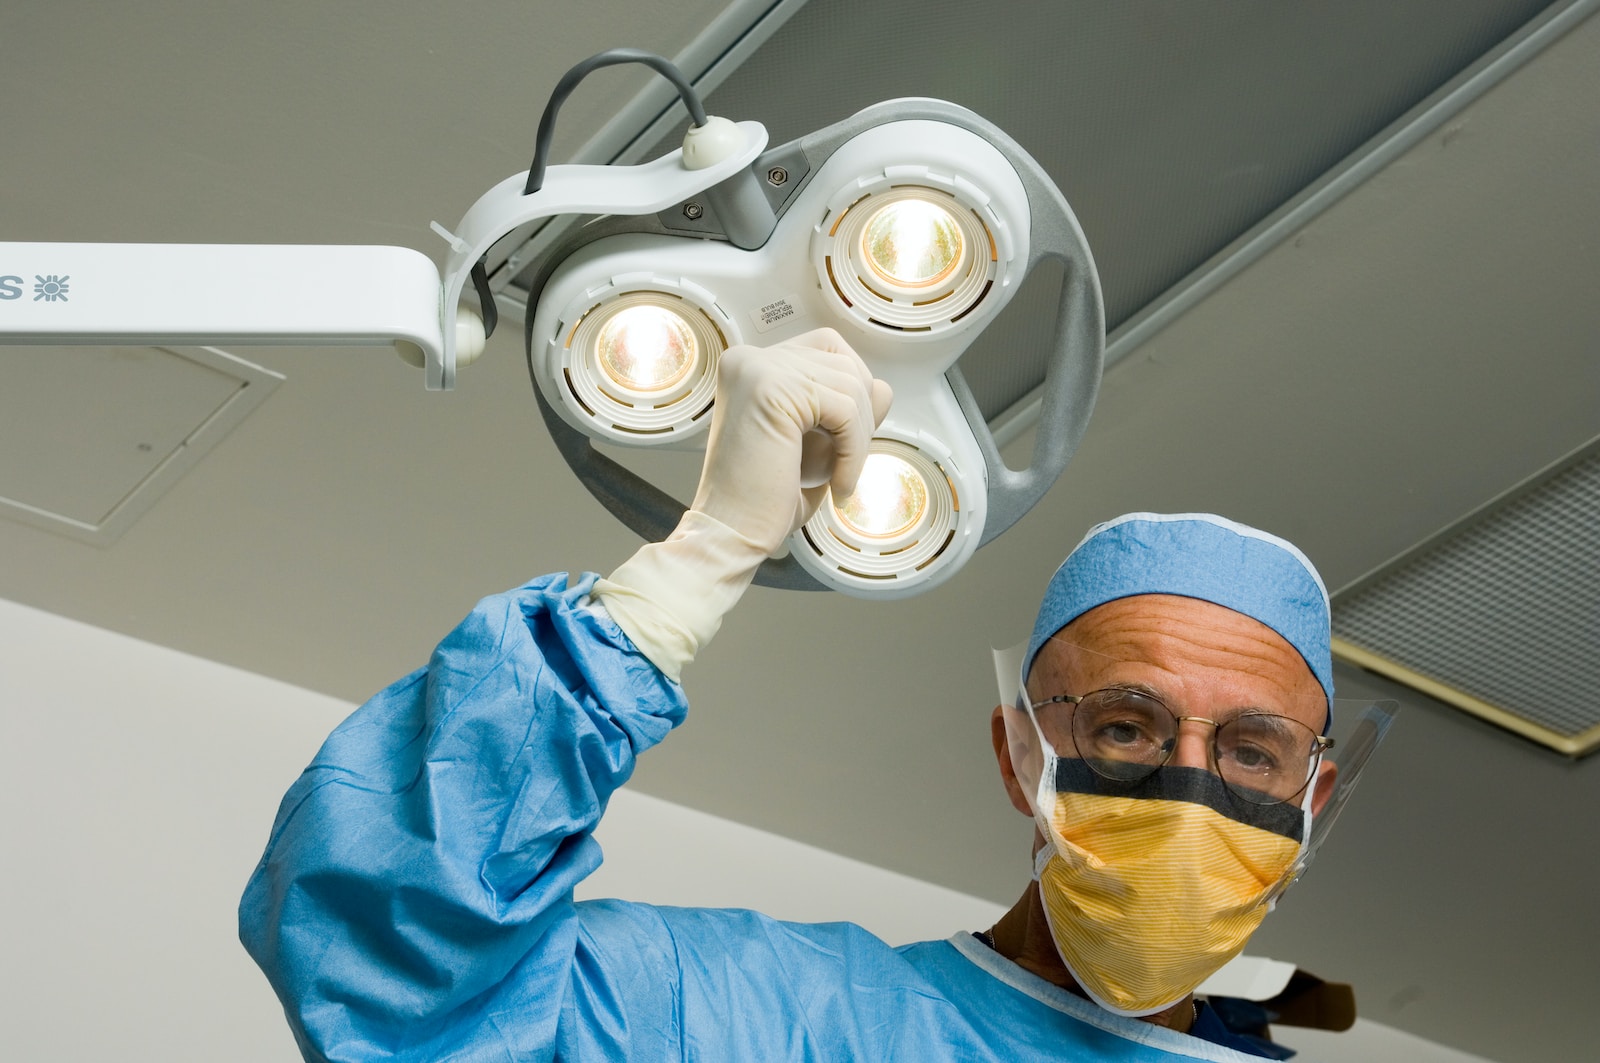 a man in a surgical gown holding up a surgical light